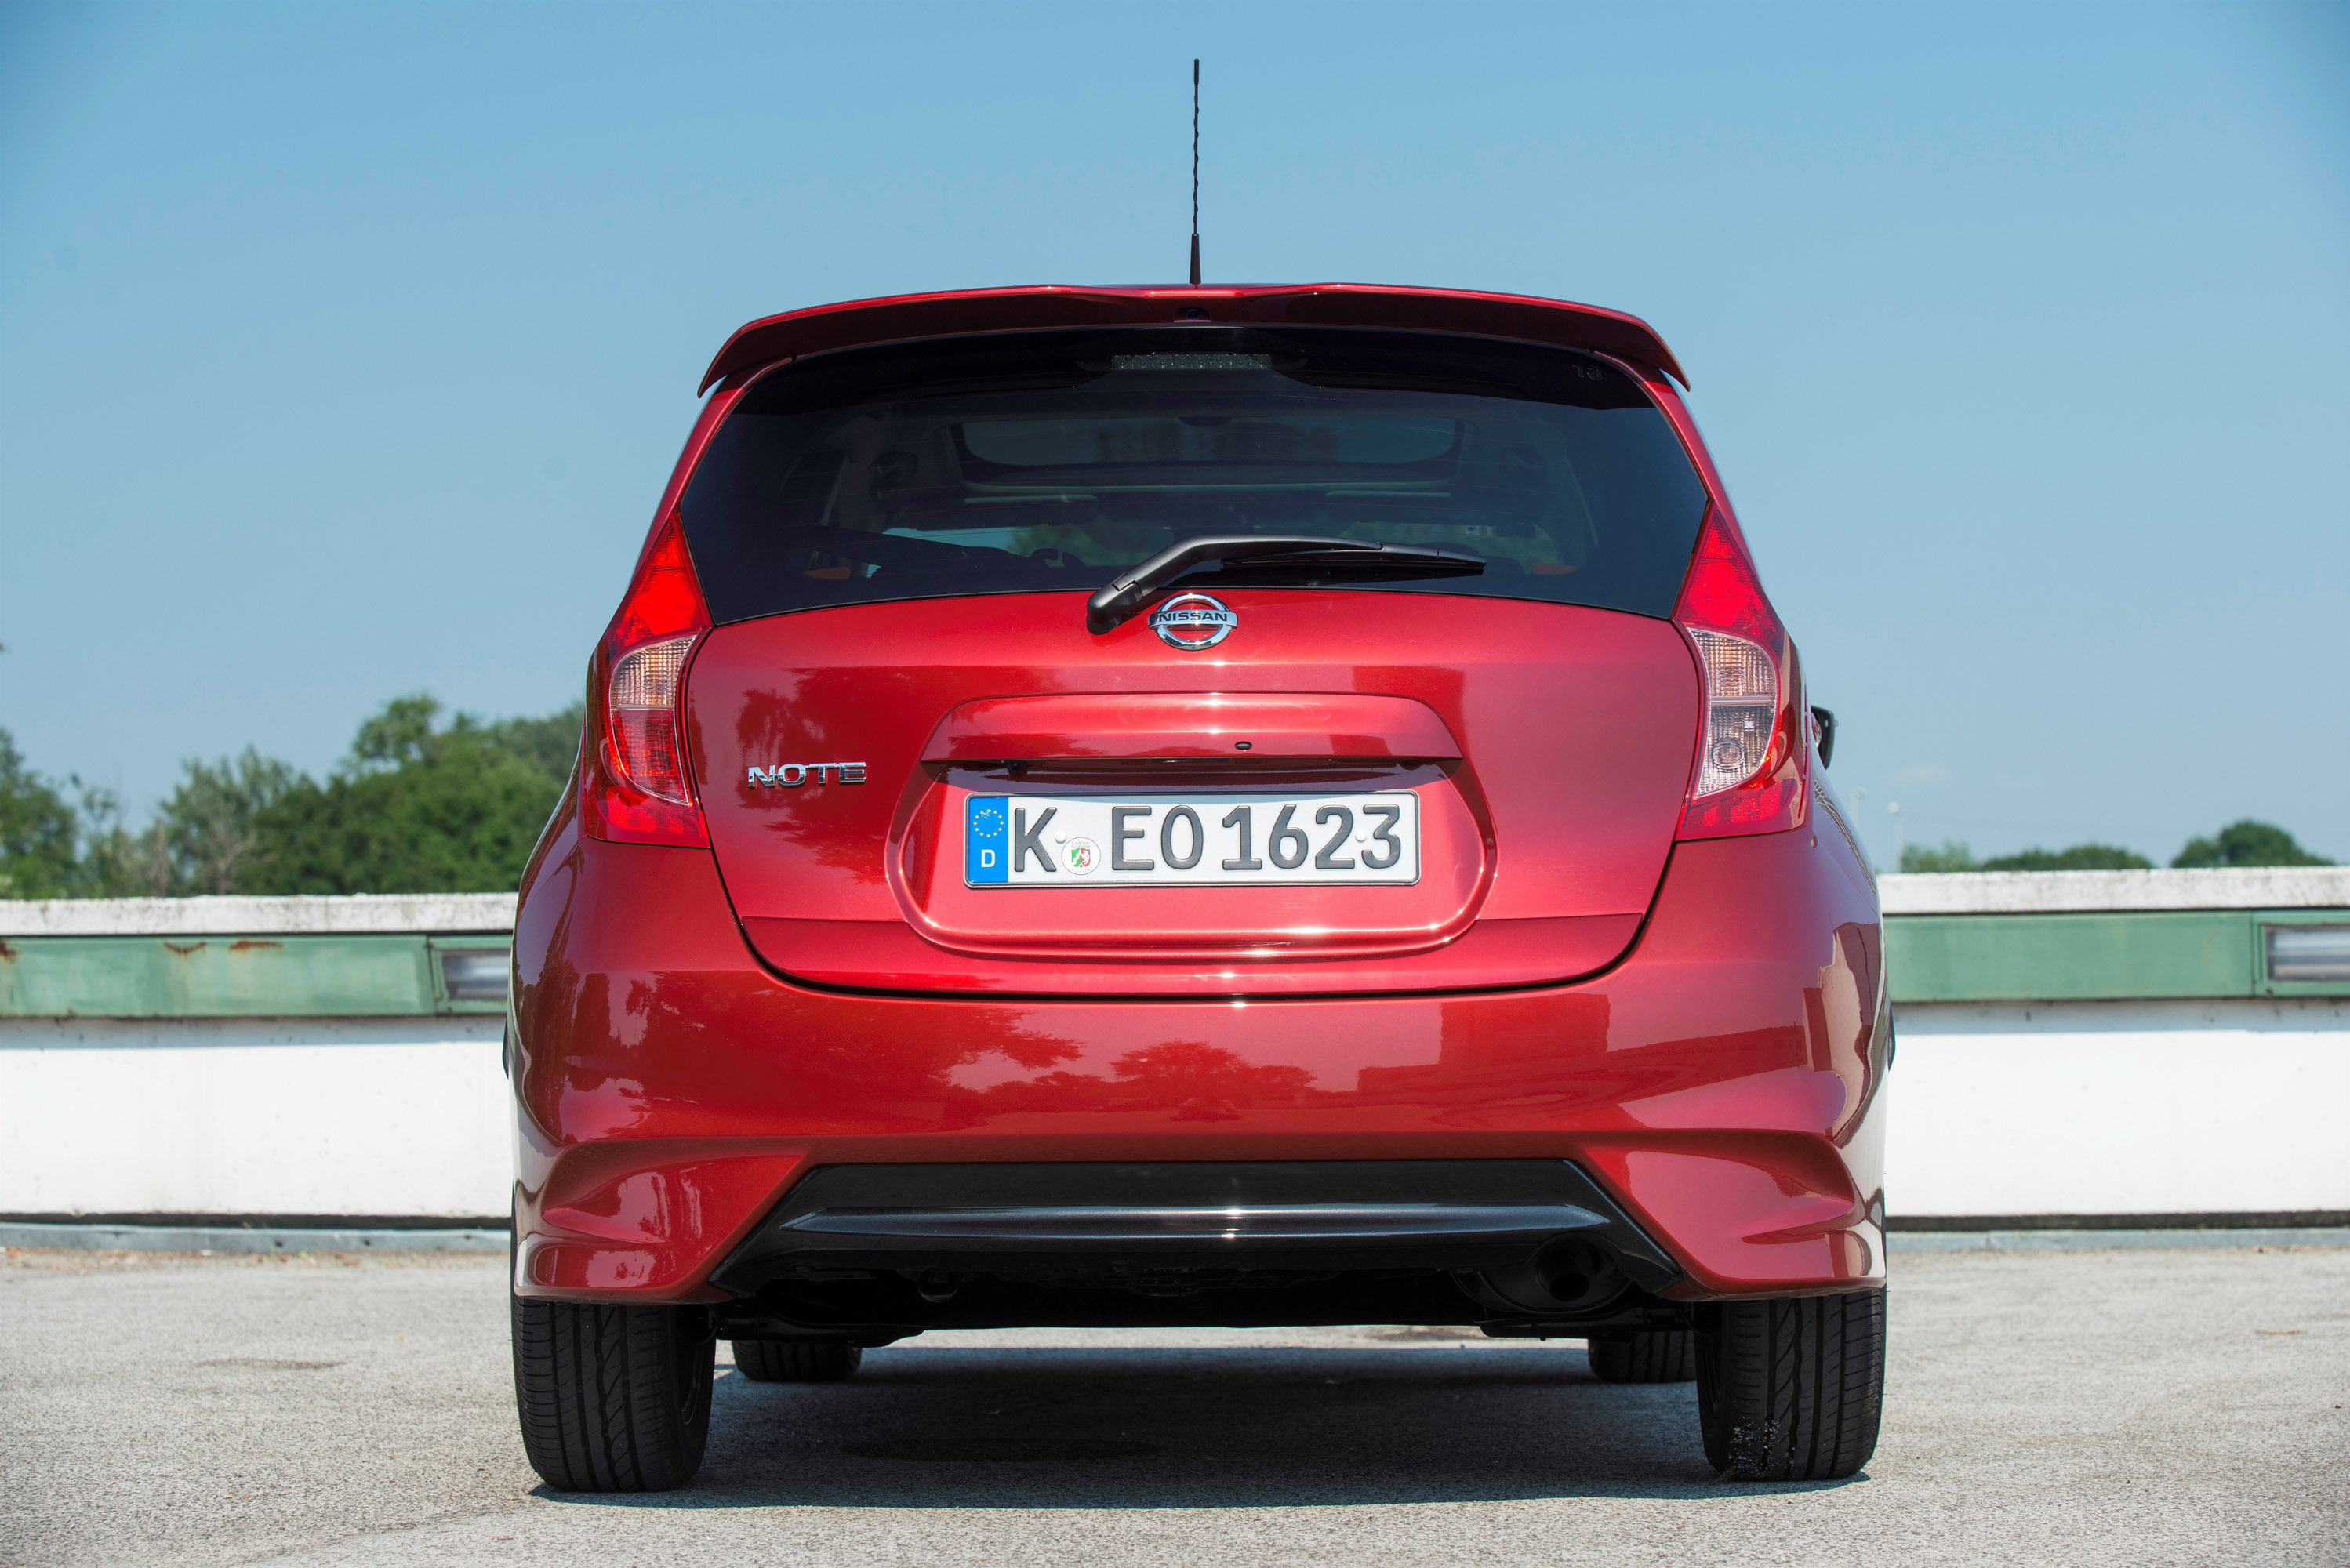 Note e 12. Ниссан ноут е12. Nissan Note dig-s.